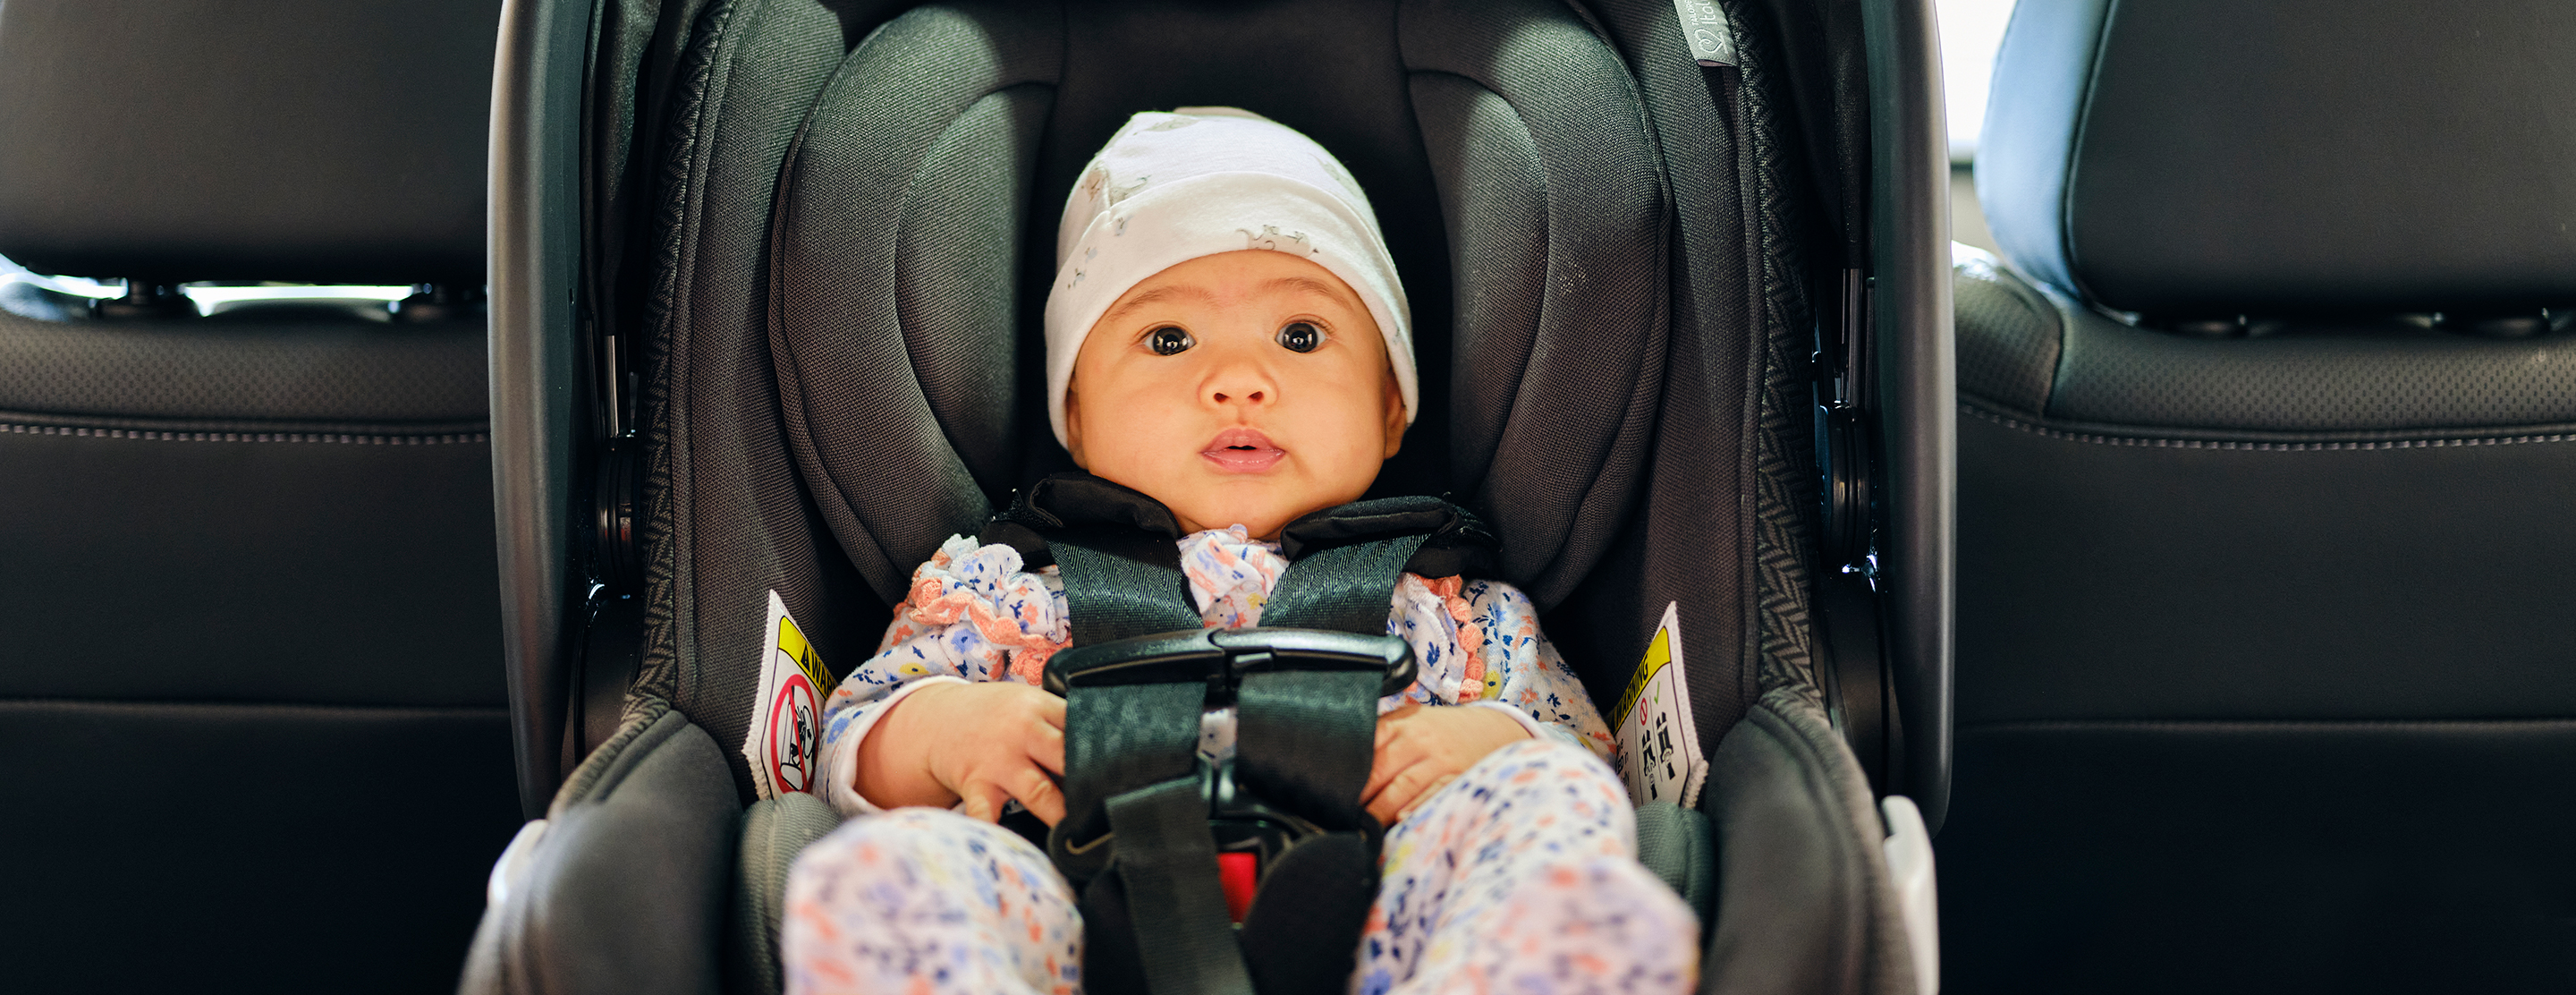 Car Seat Safety Patient Education, When Did Car Seats Become Mandatory In California